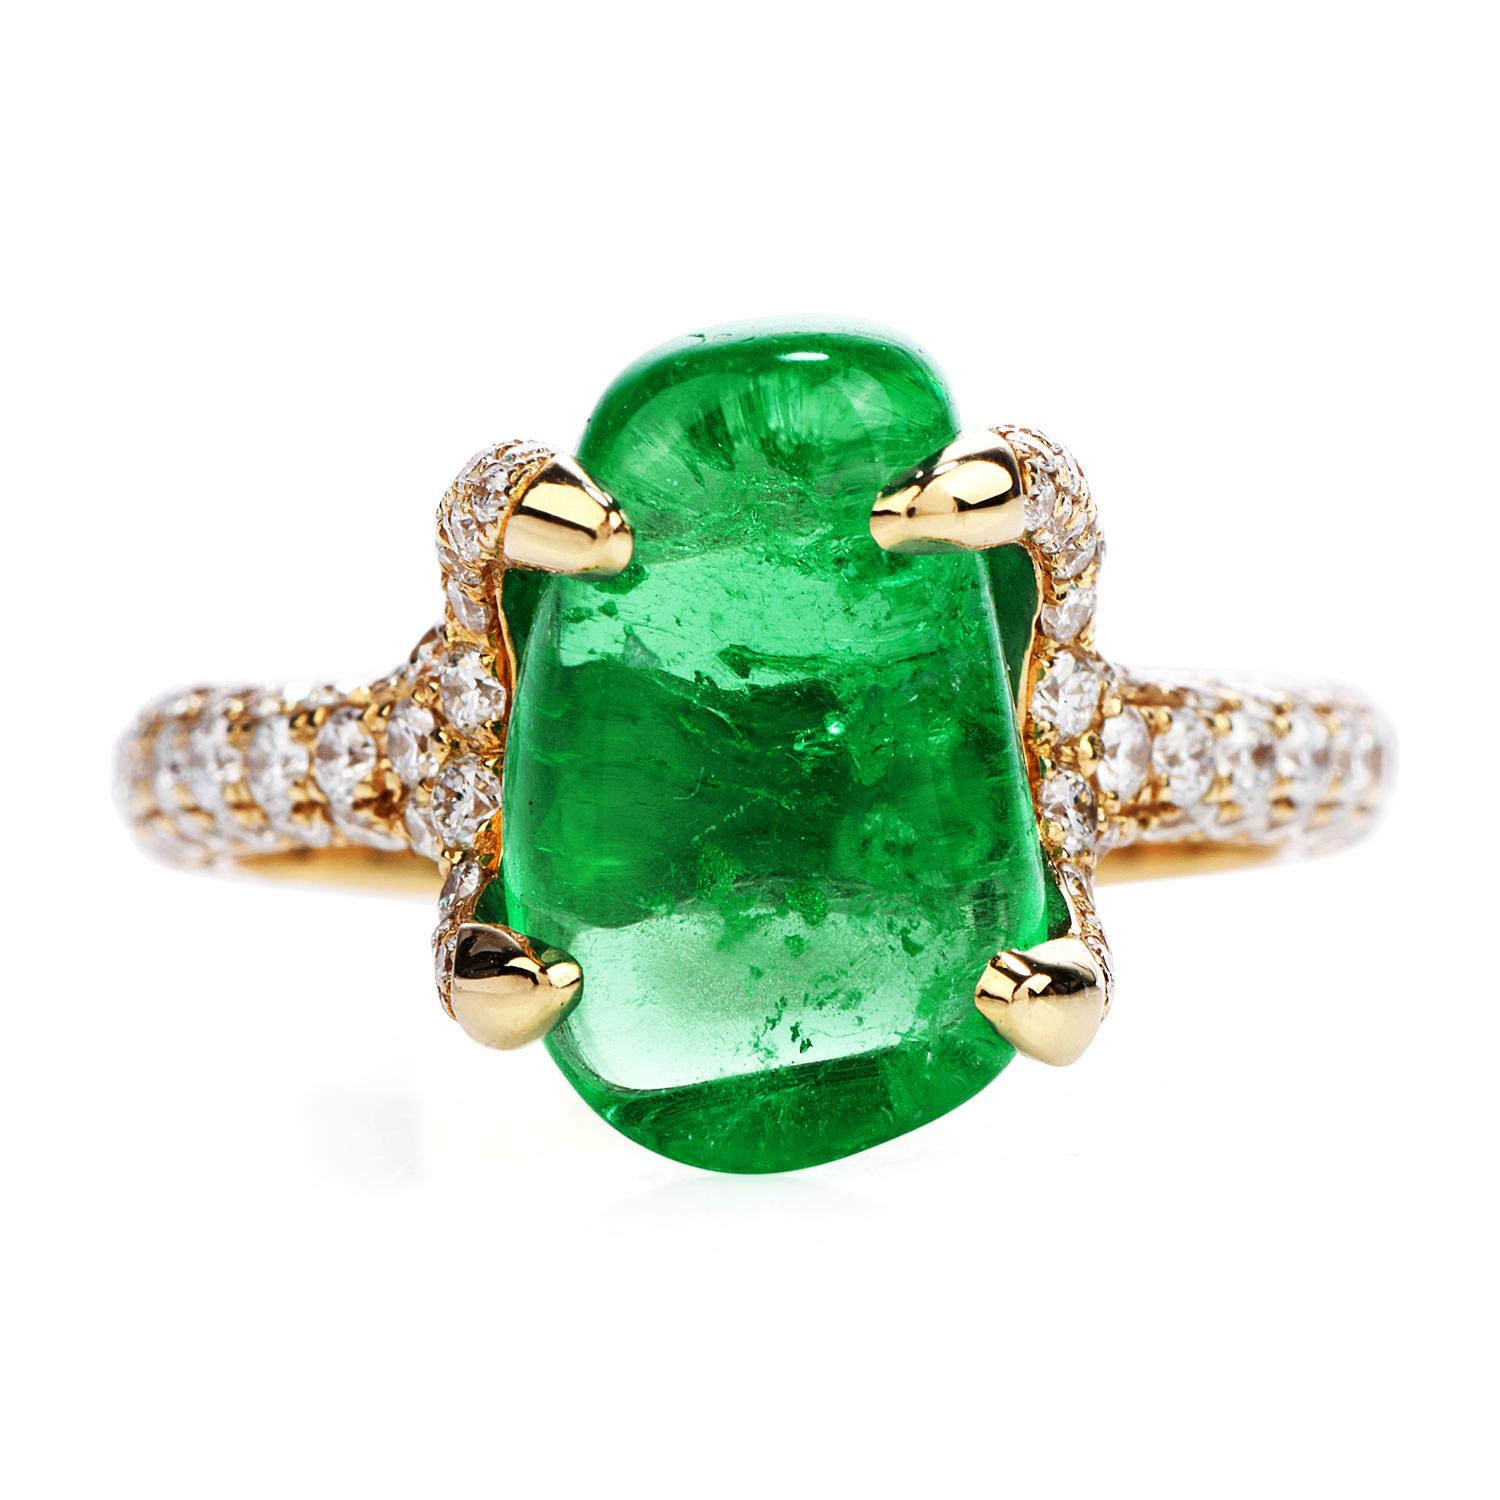 Deep Green & Big Emerald? Yes, please!

This exhilarating Cocktail Ring has a beautiful 6.92ct Colombian Emerald!

With an Oval cabochon cut, held by four large prongs,

It is crafted in solid 18K White Gold,

and it is adorned by Round Cut, pave